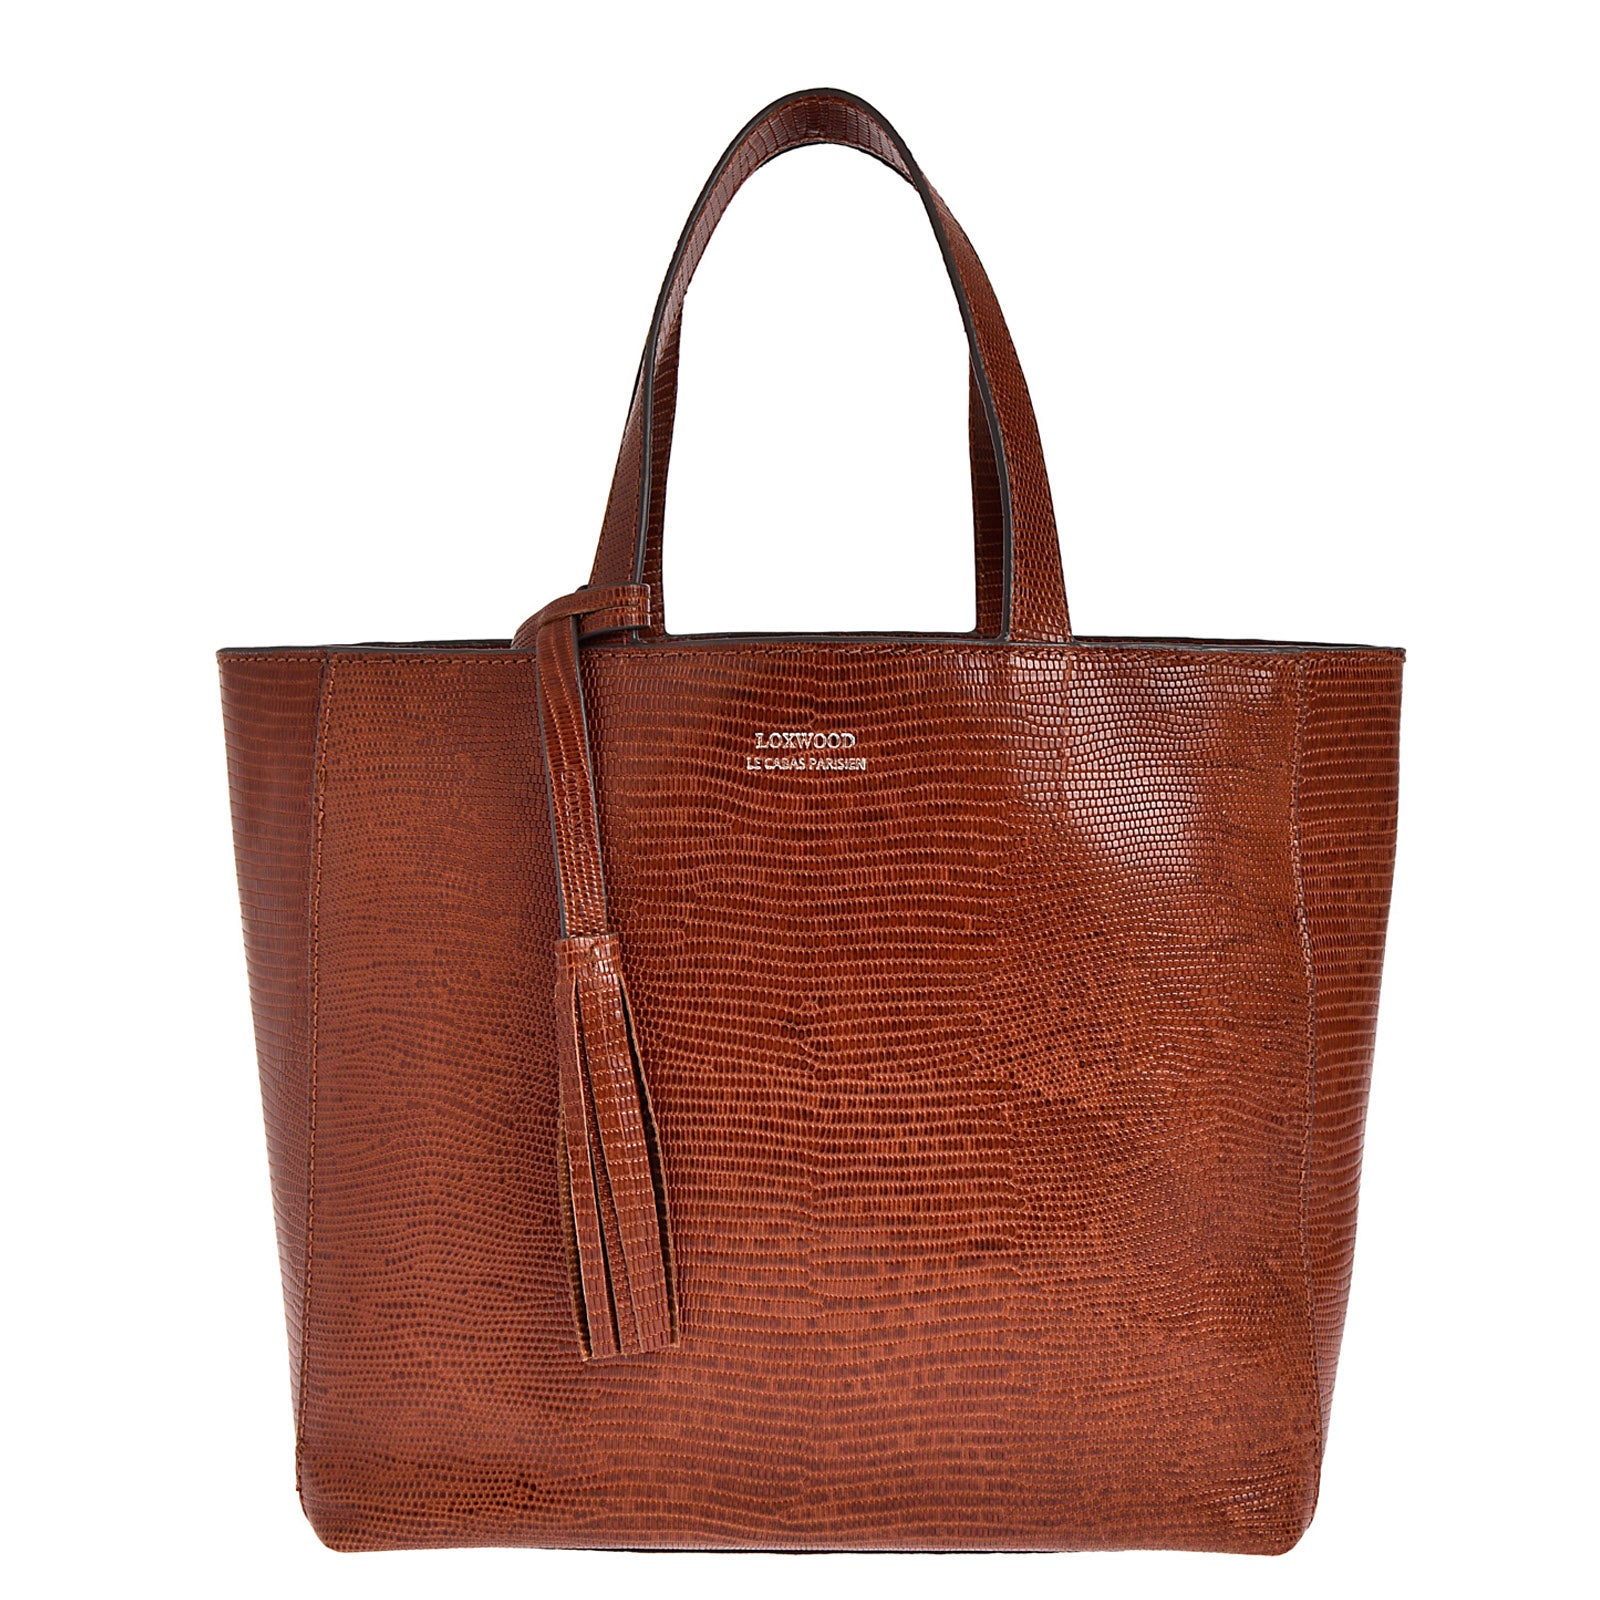 SMALL PARISIAN TOTE - LIZARD EMBOSSED LEATHER